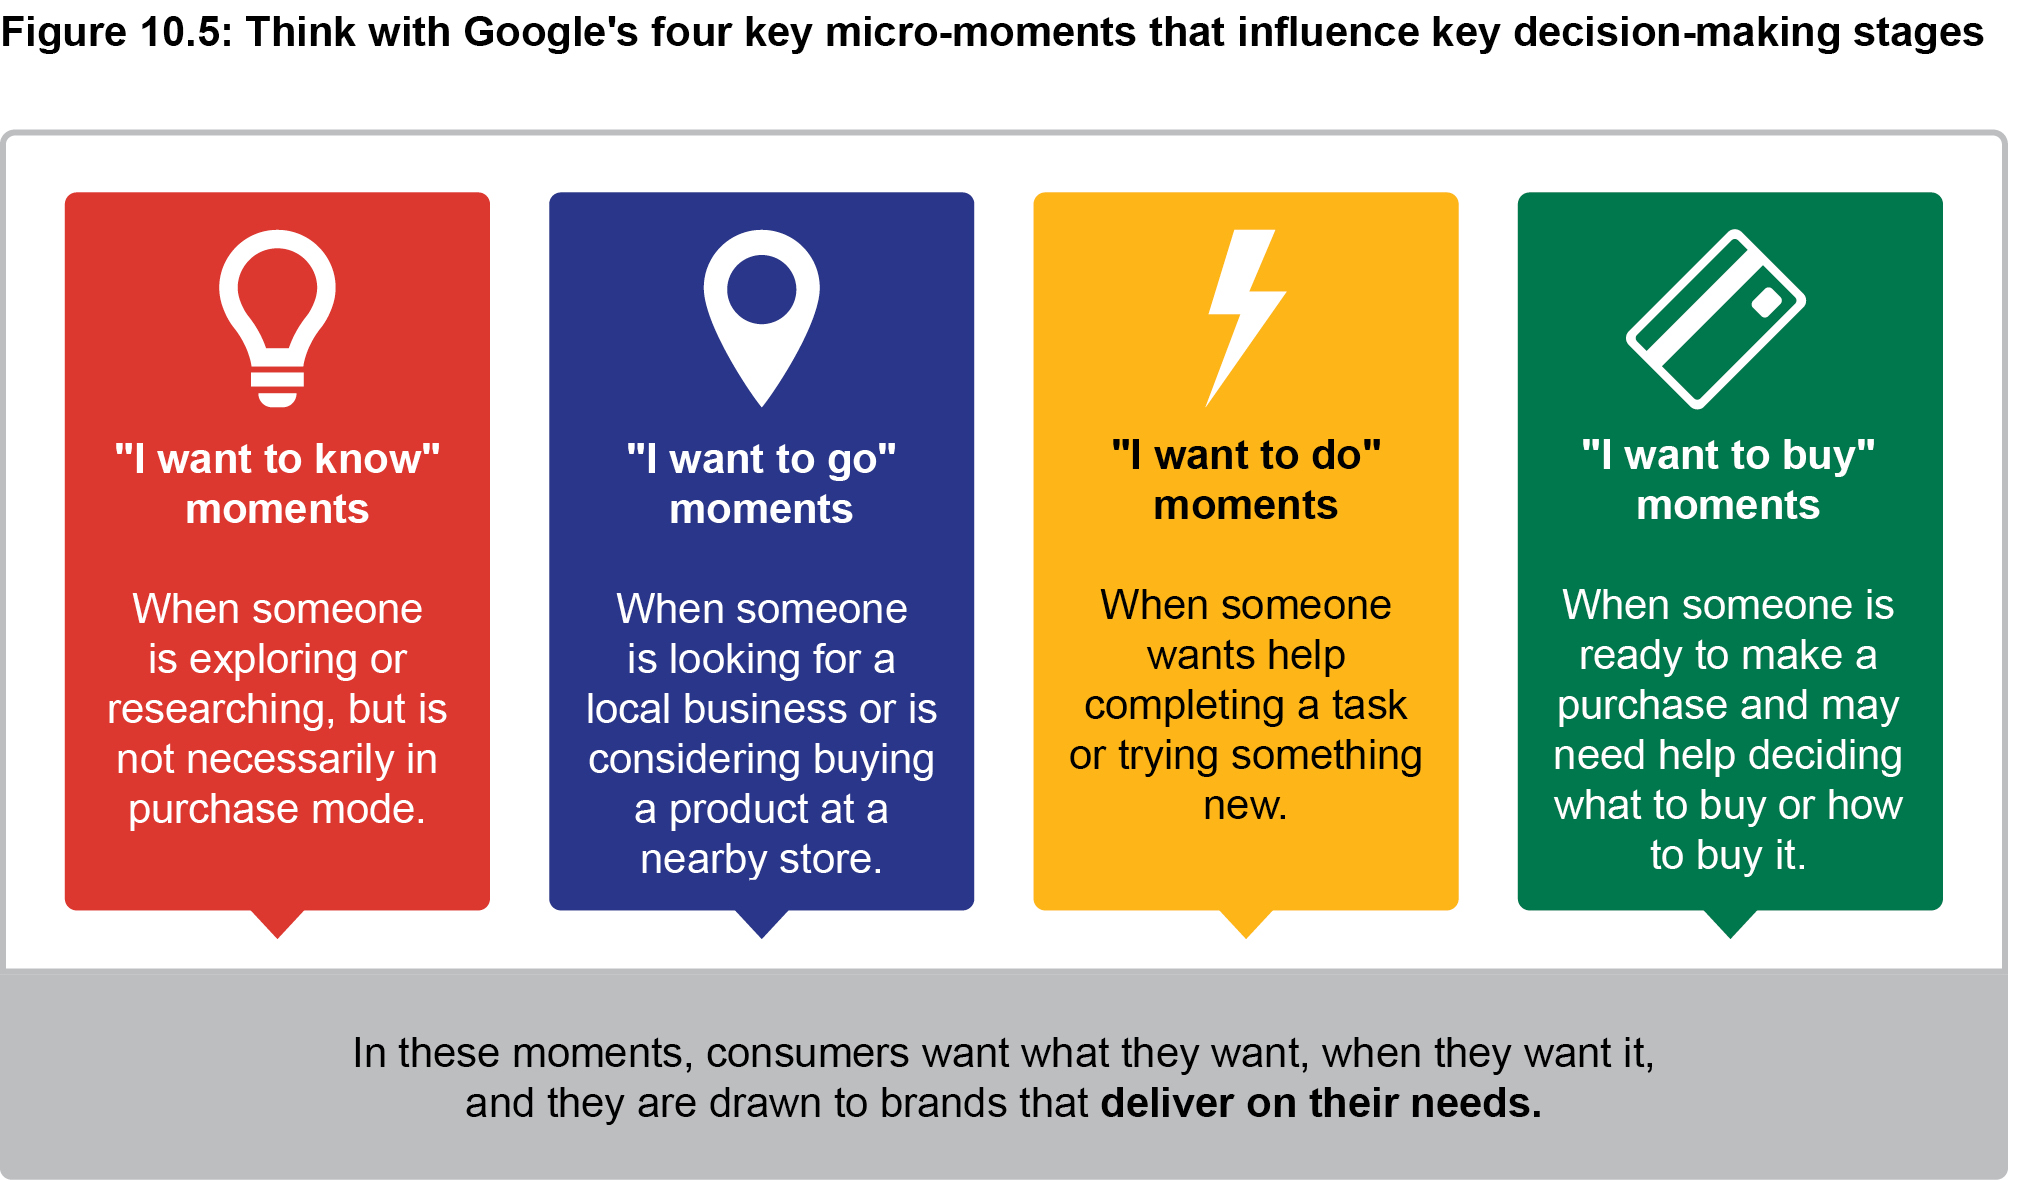 Think with Google's four key micro-moments that influence key decision-making stages